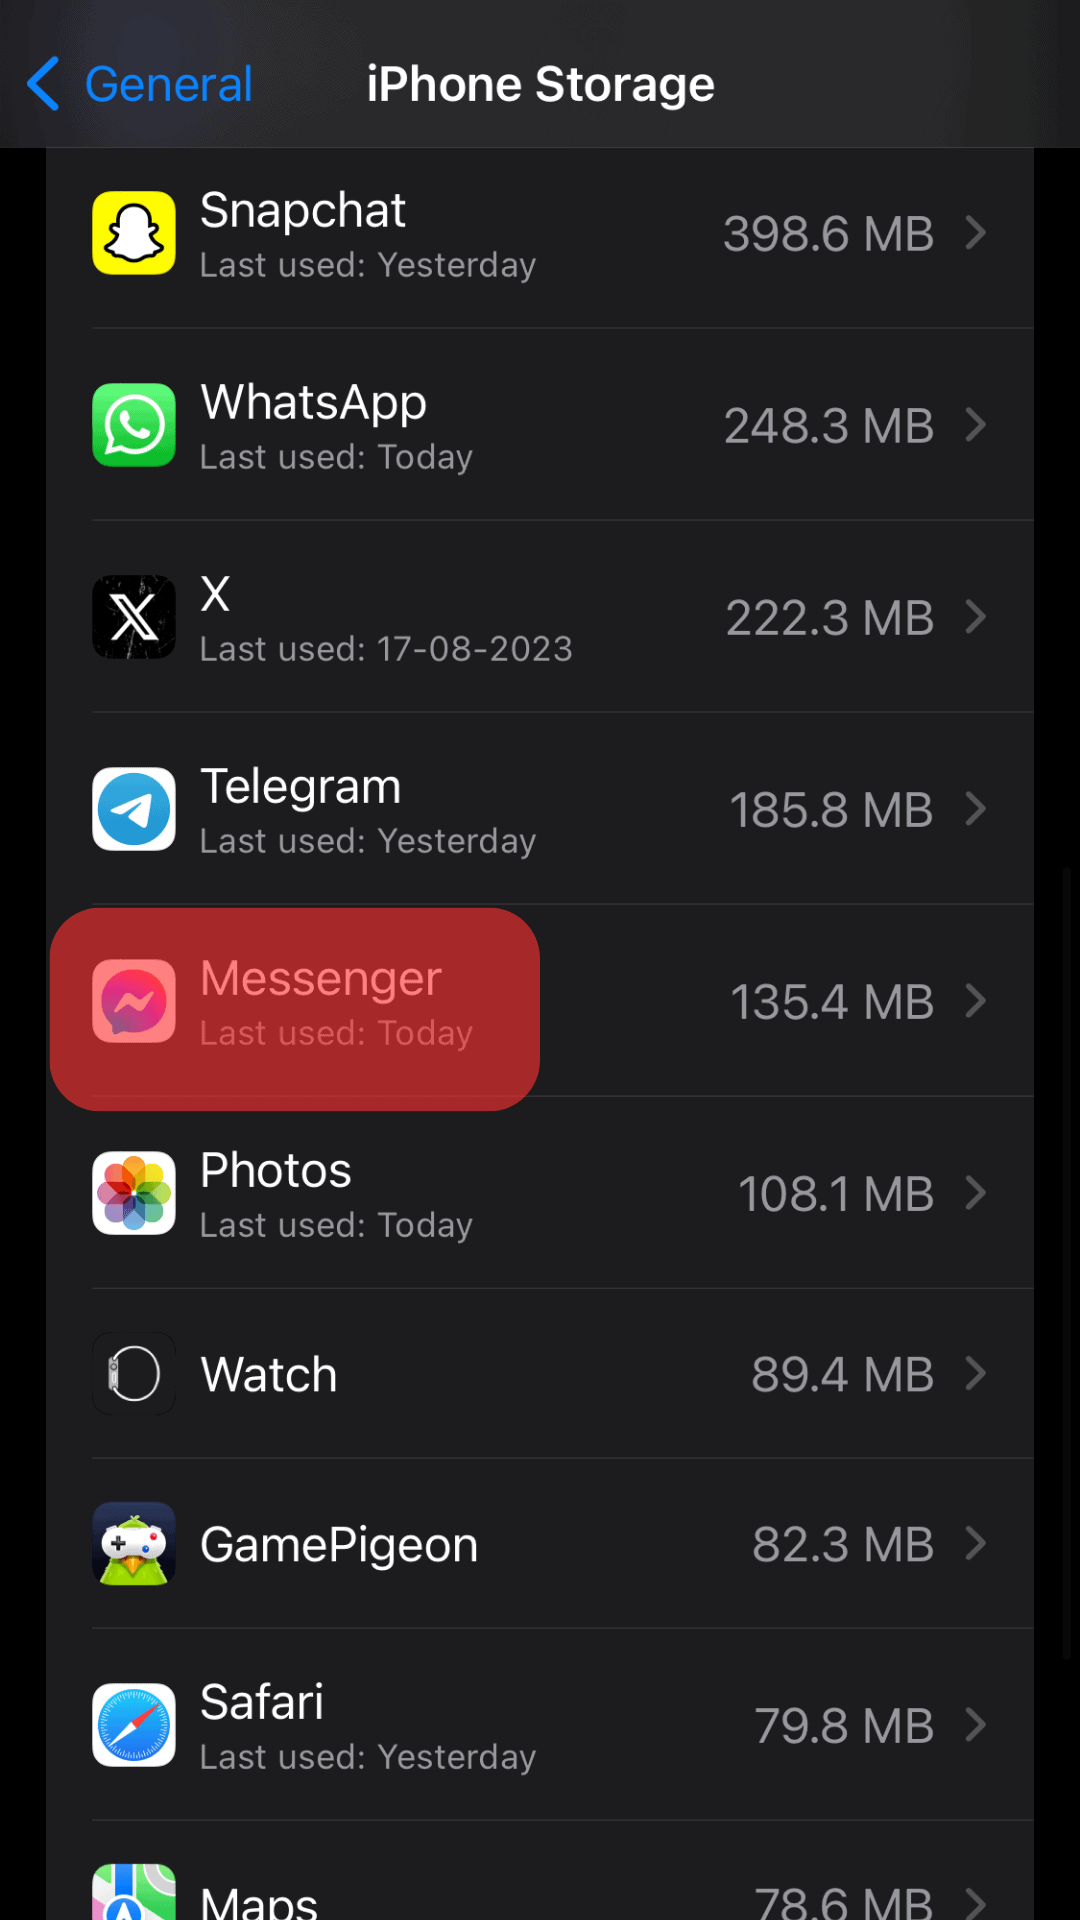 Scroll To Messenger In Iphone Storage